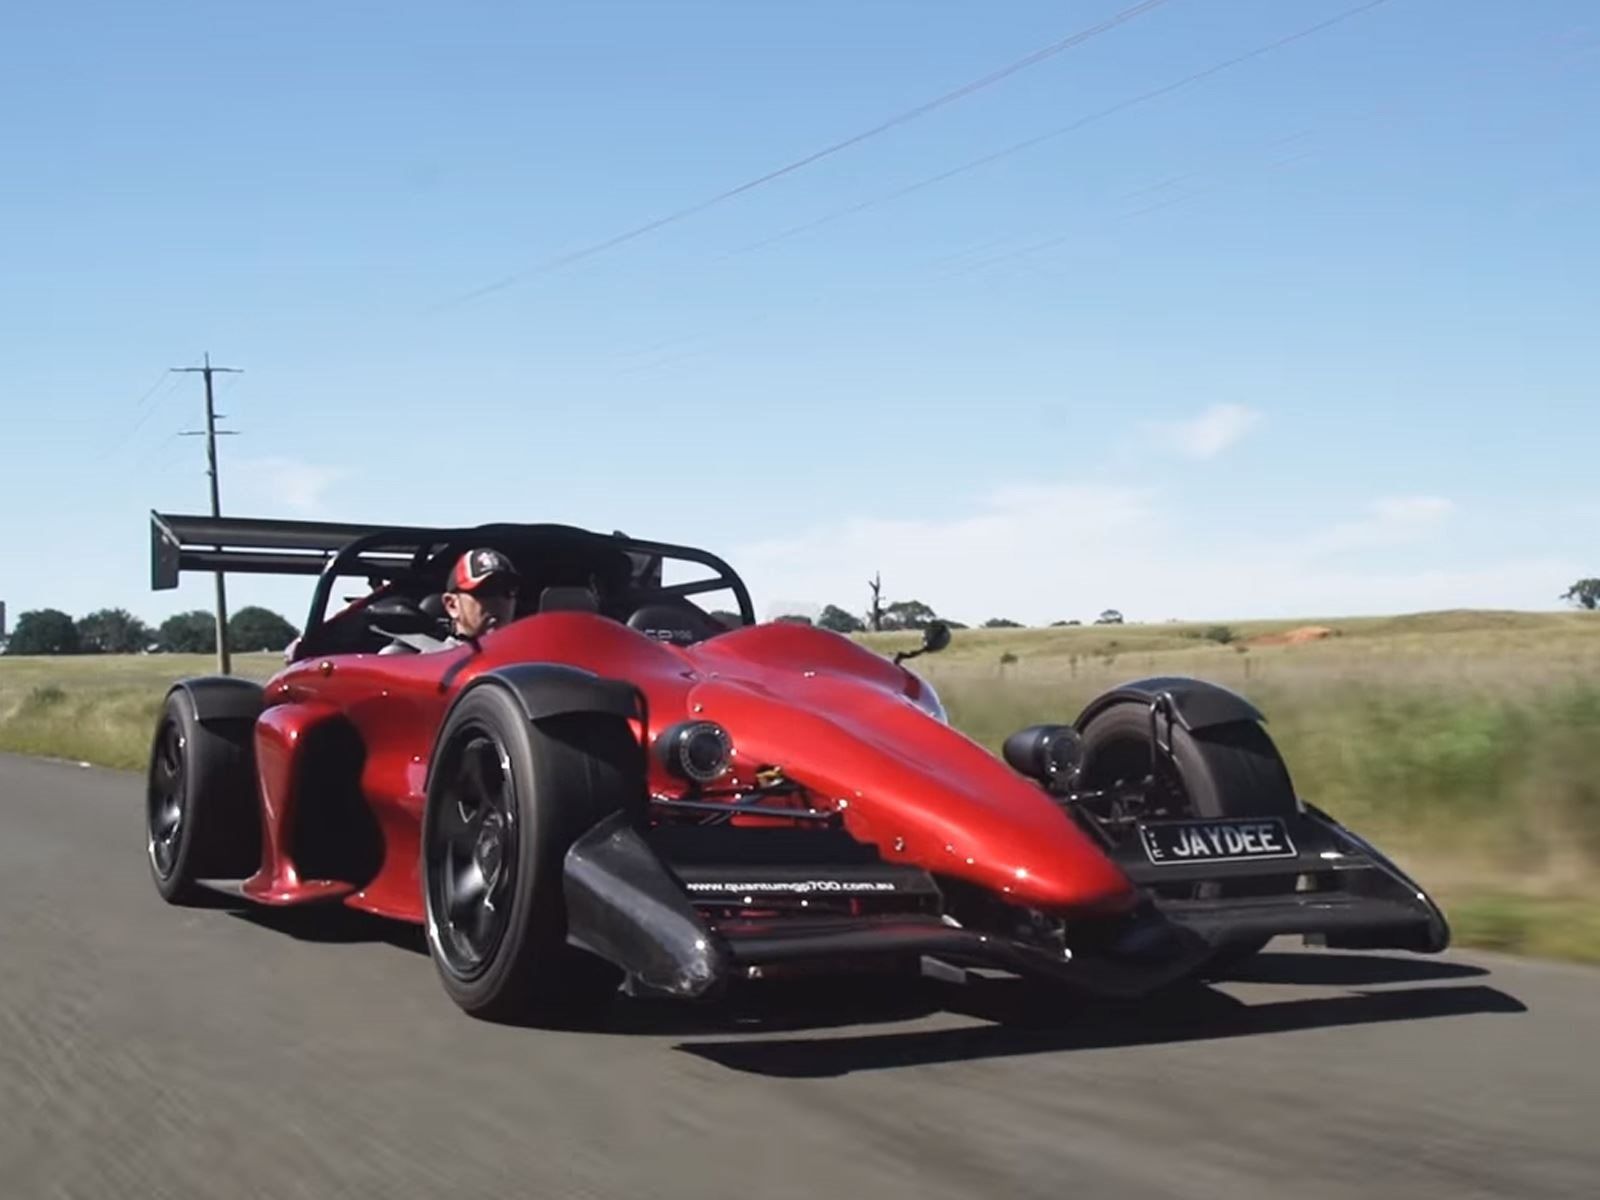 This Australian Guy Turned An Ariel Atom Into A Hypercar In His